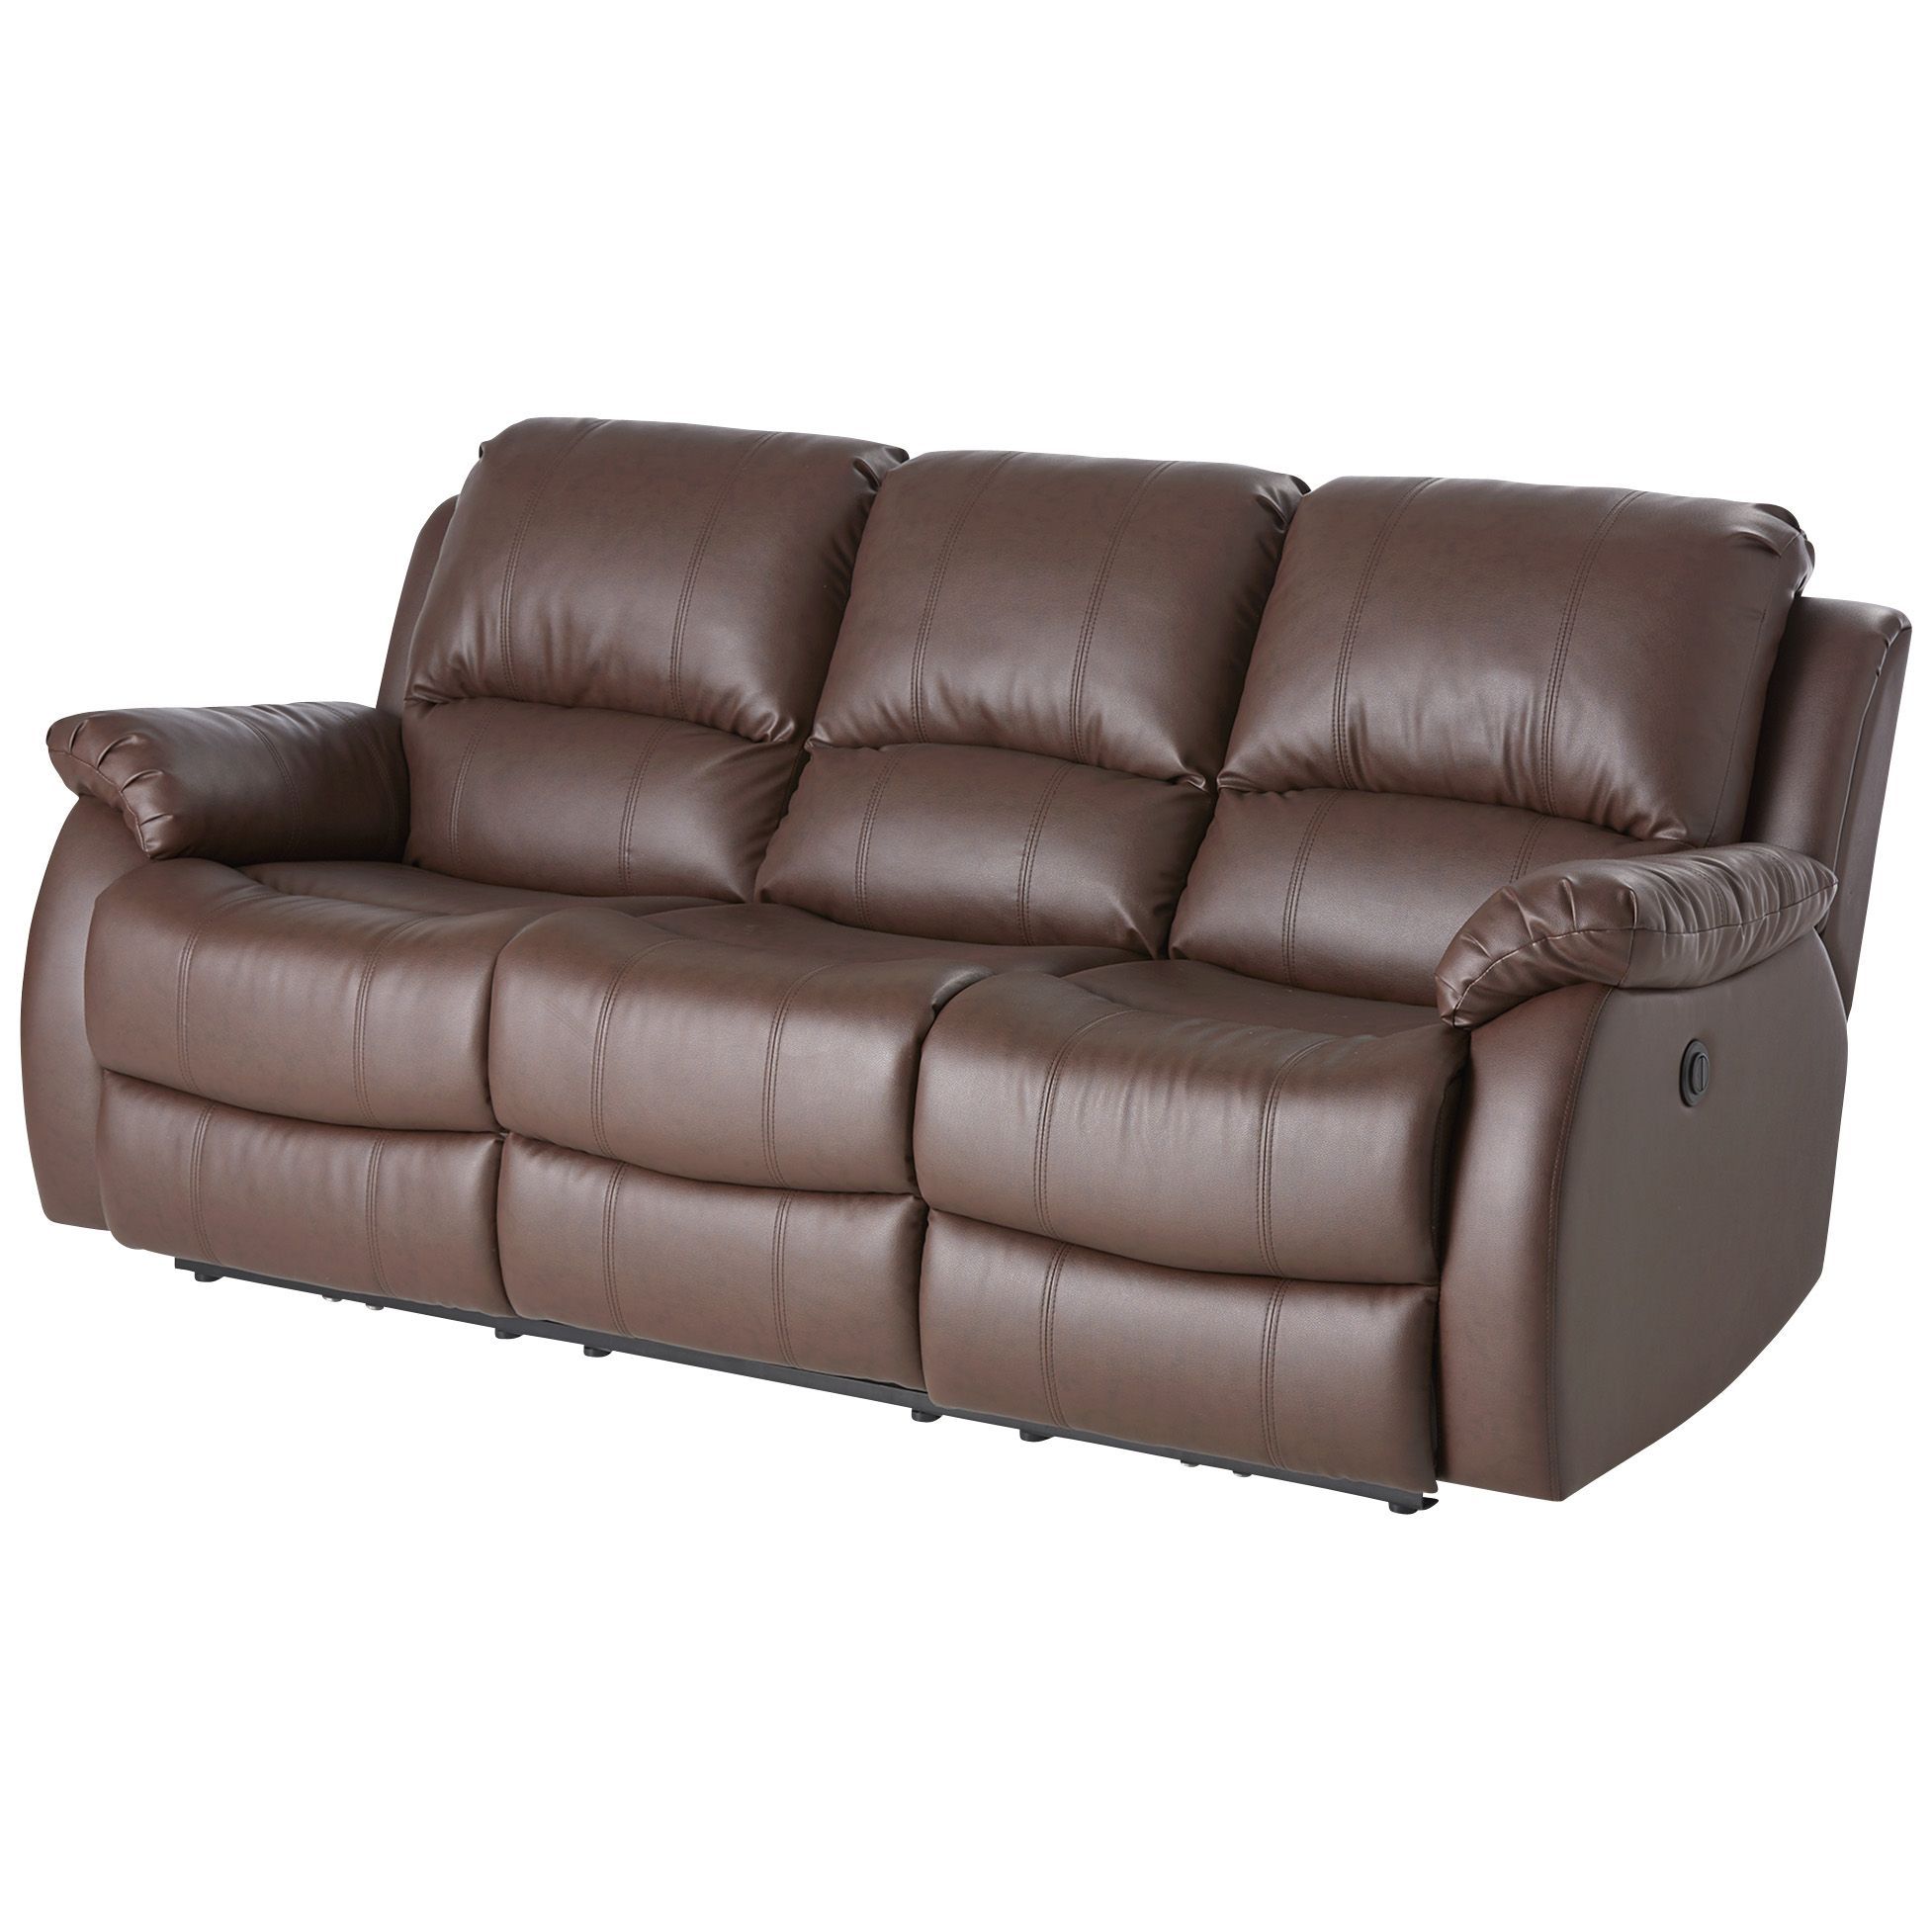 Brand New Electric Power Reclining Sofa For Sale